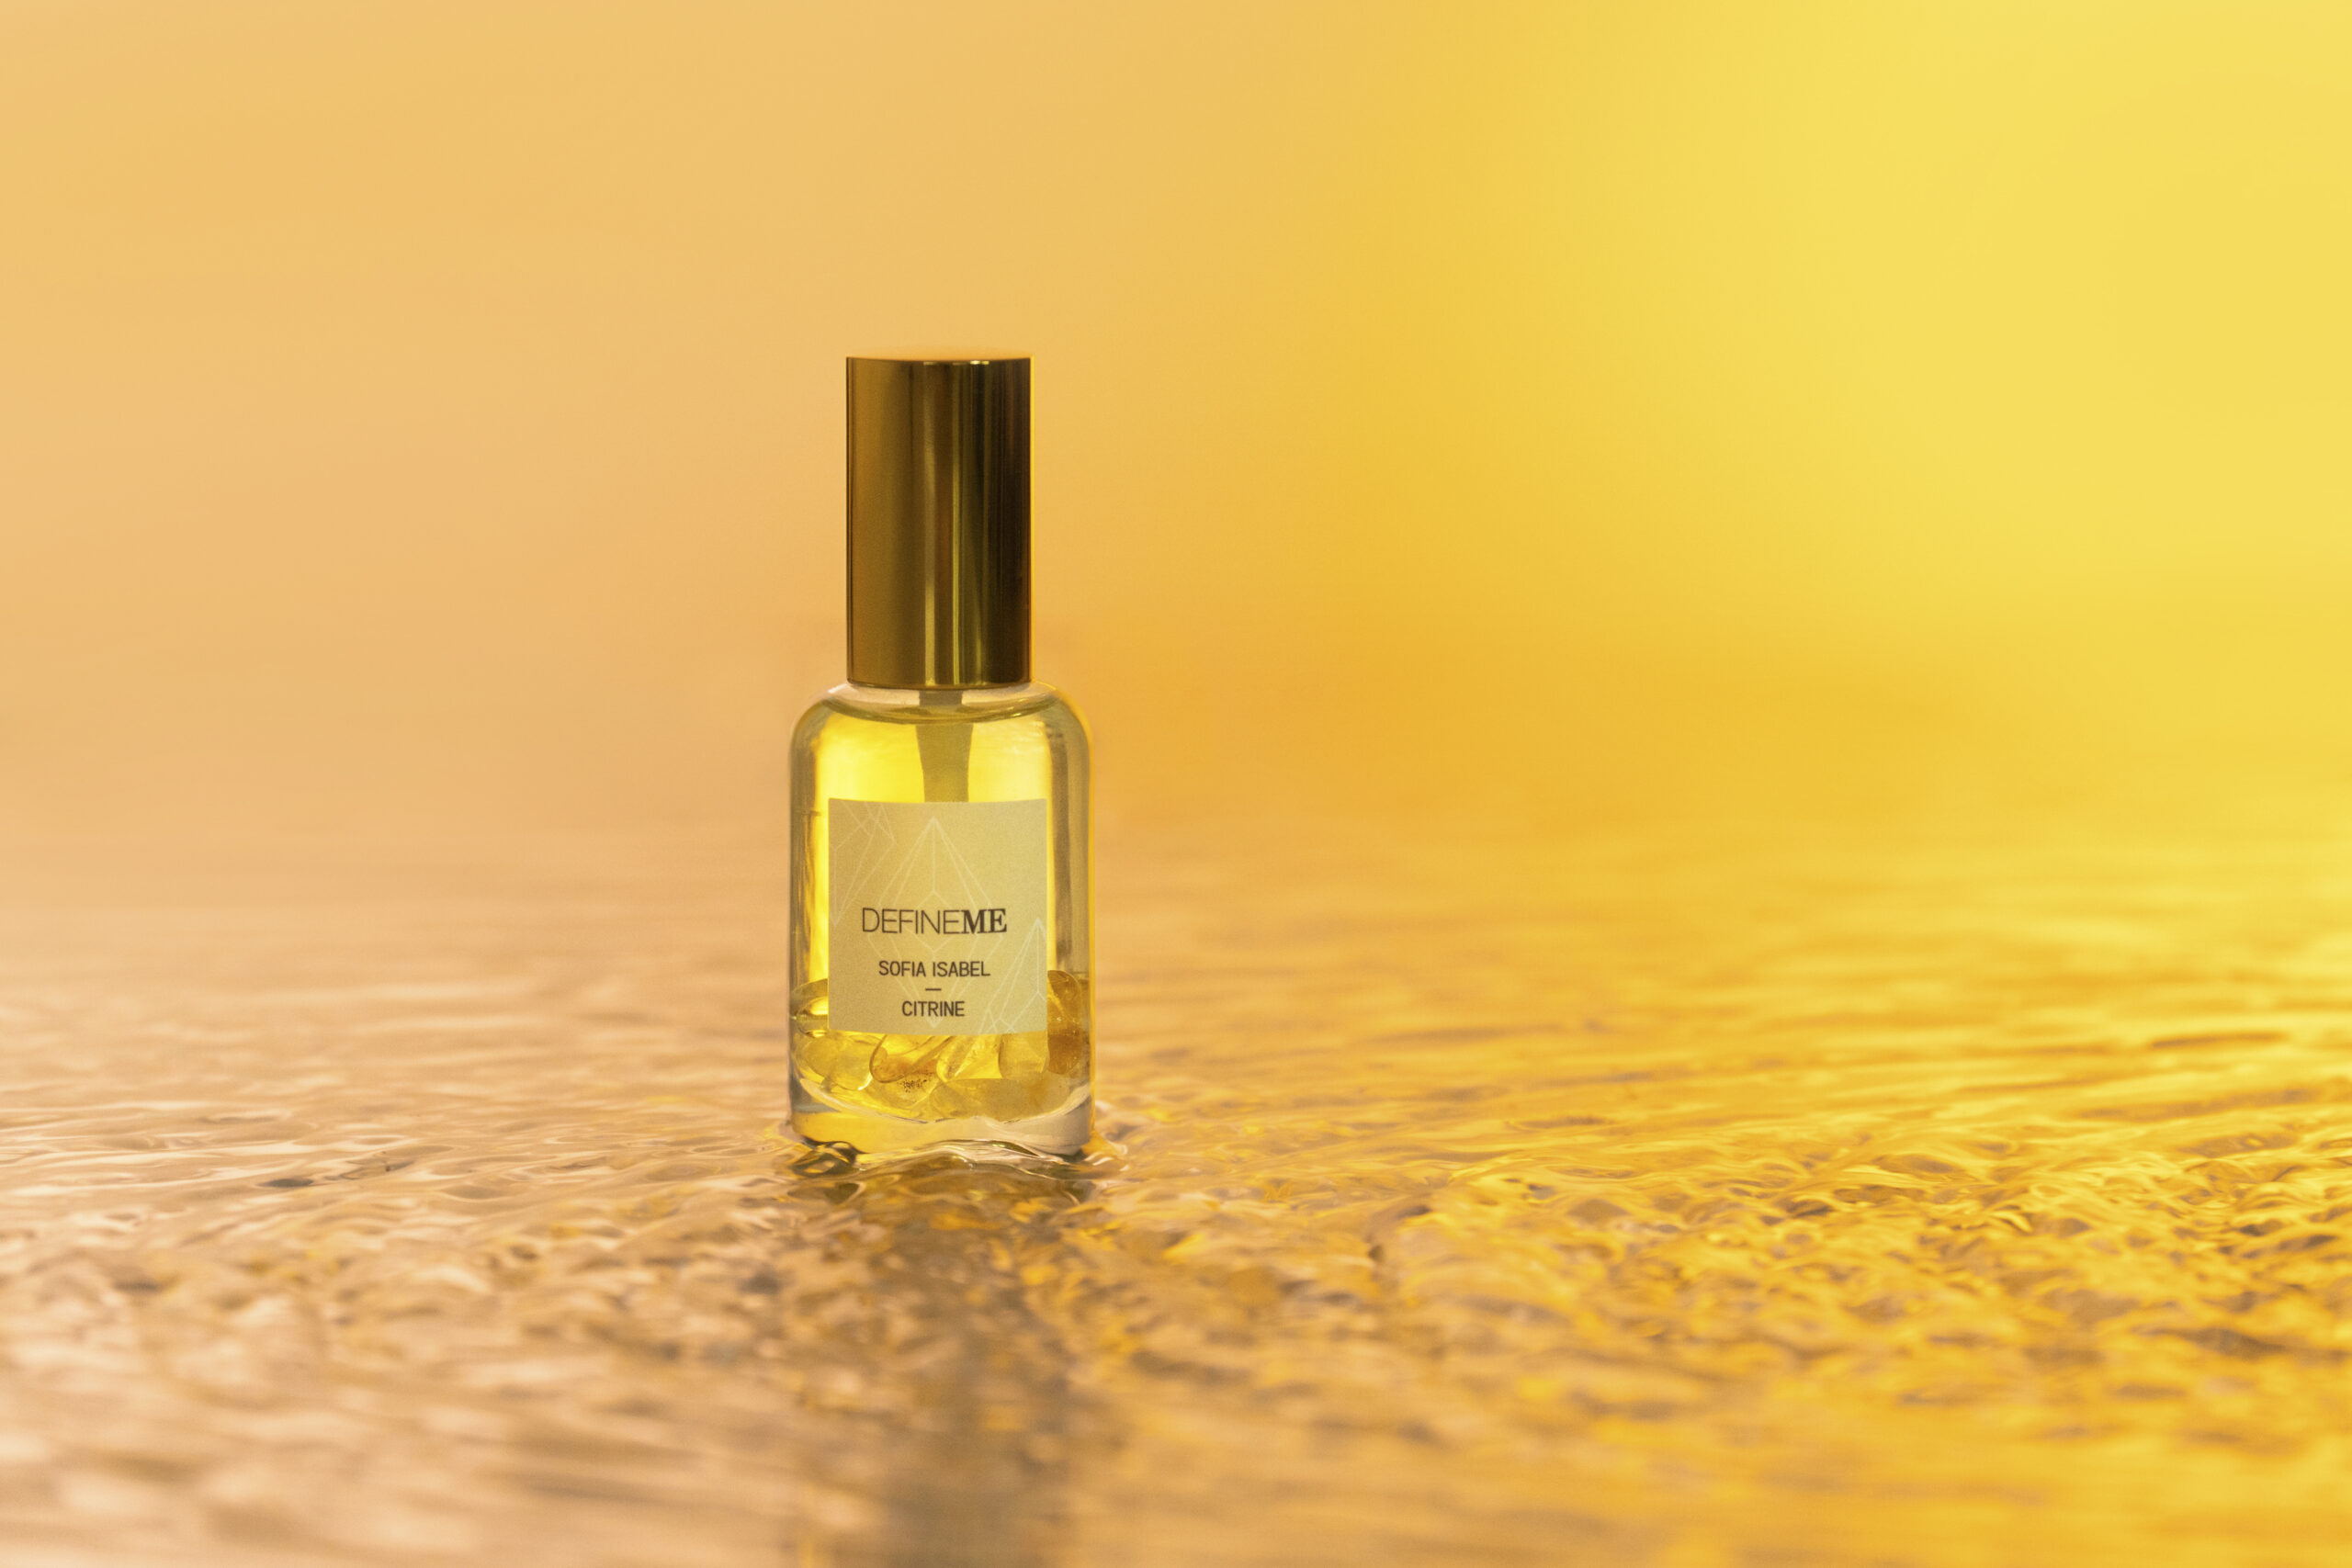 DefineMe scented meditation guided imagery perfume